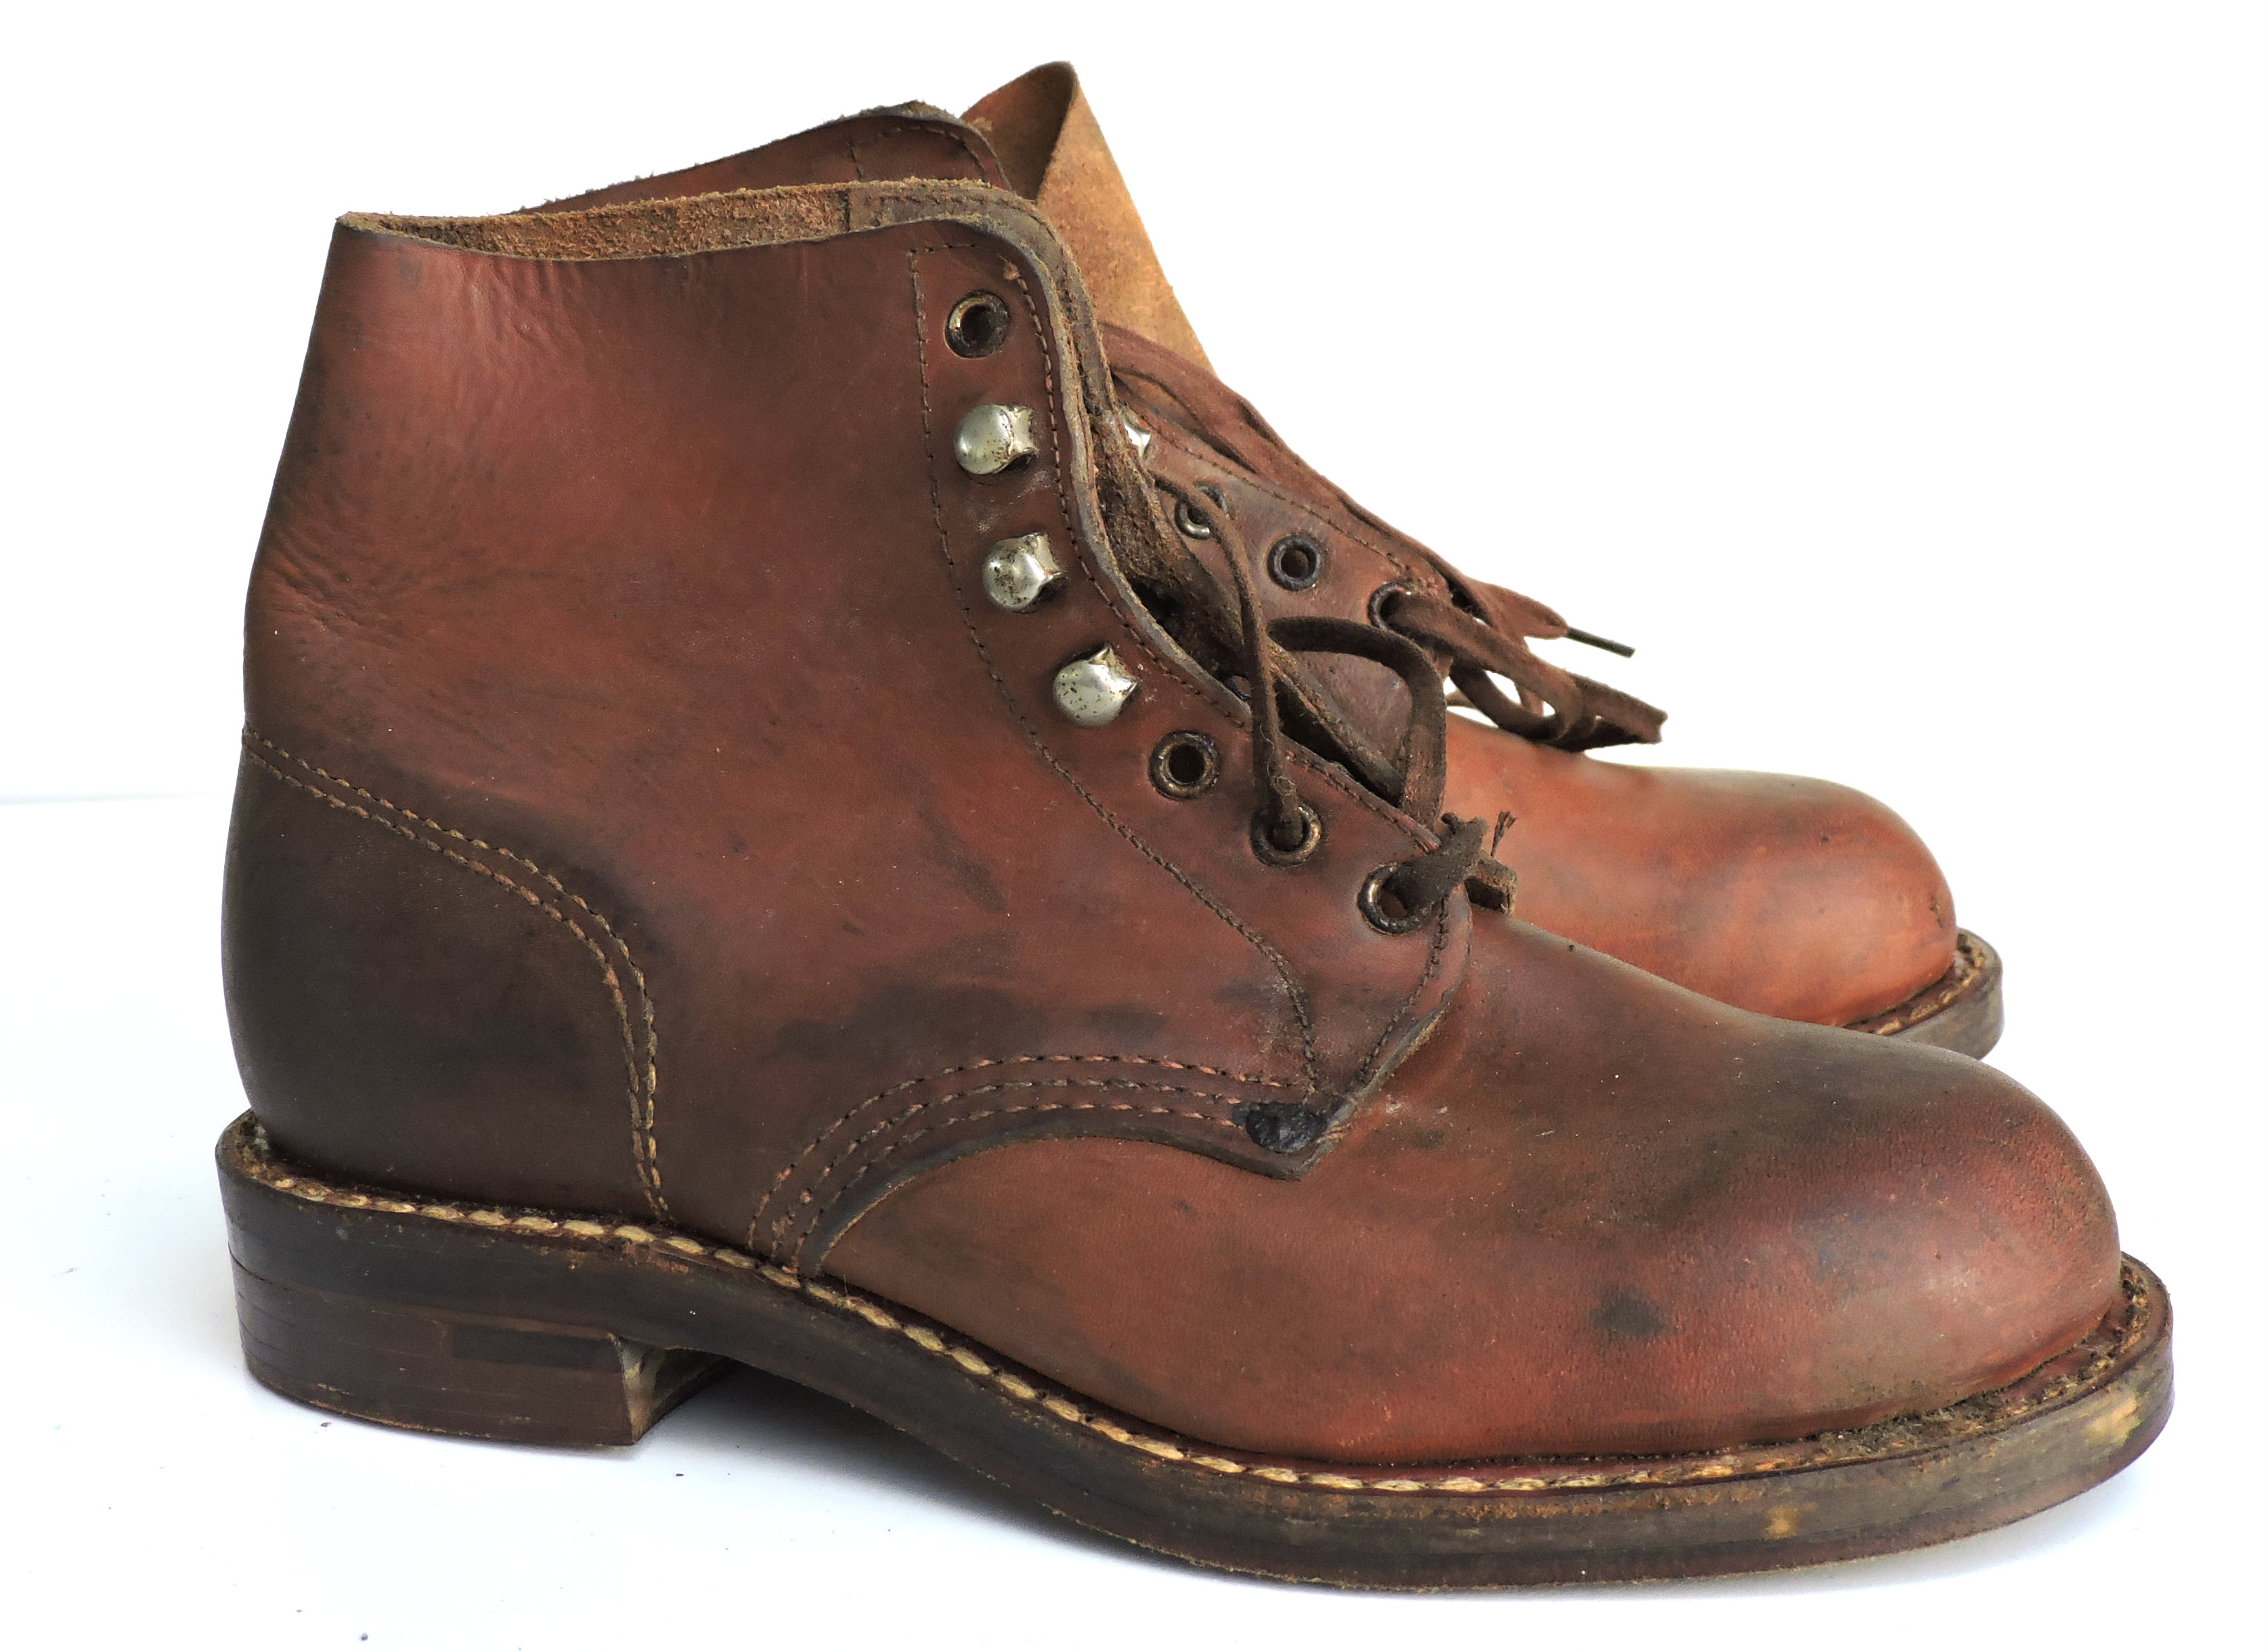 Leather shoes Boy scout 1940